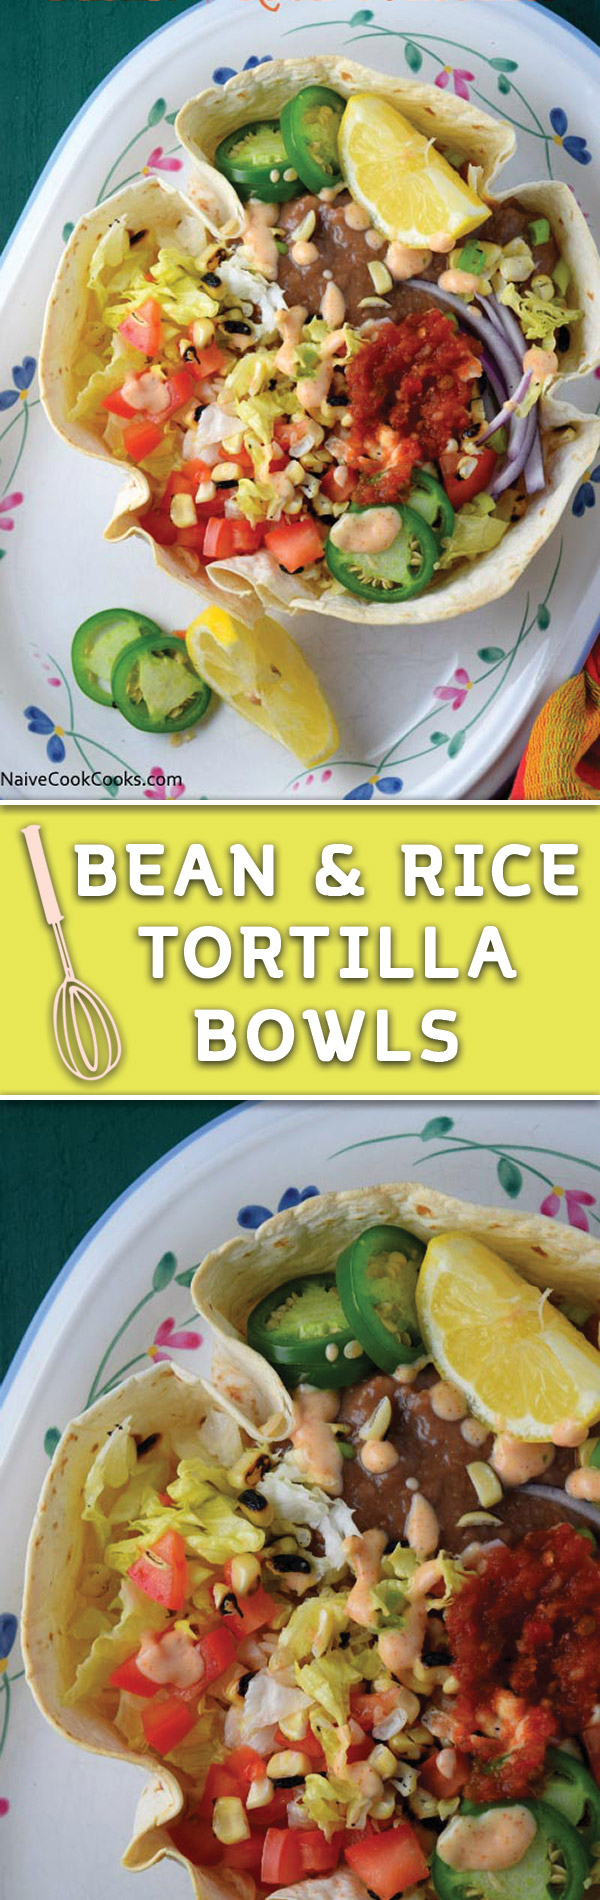 These Tortilla Bowls are filled with fresh homemade refried beans, taco seasoned rice, chipotle salsa, spicy ranch & fresh veggies! Perfect healthy and delicious meal ready in under an hour!